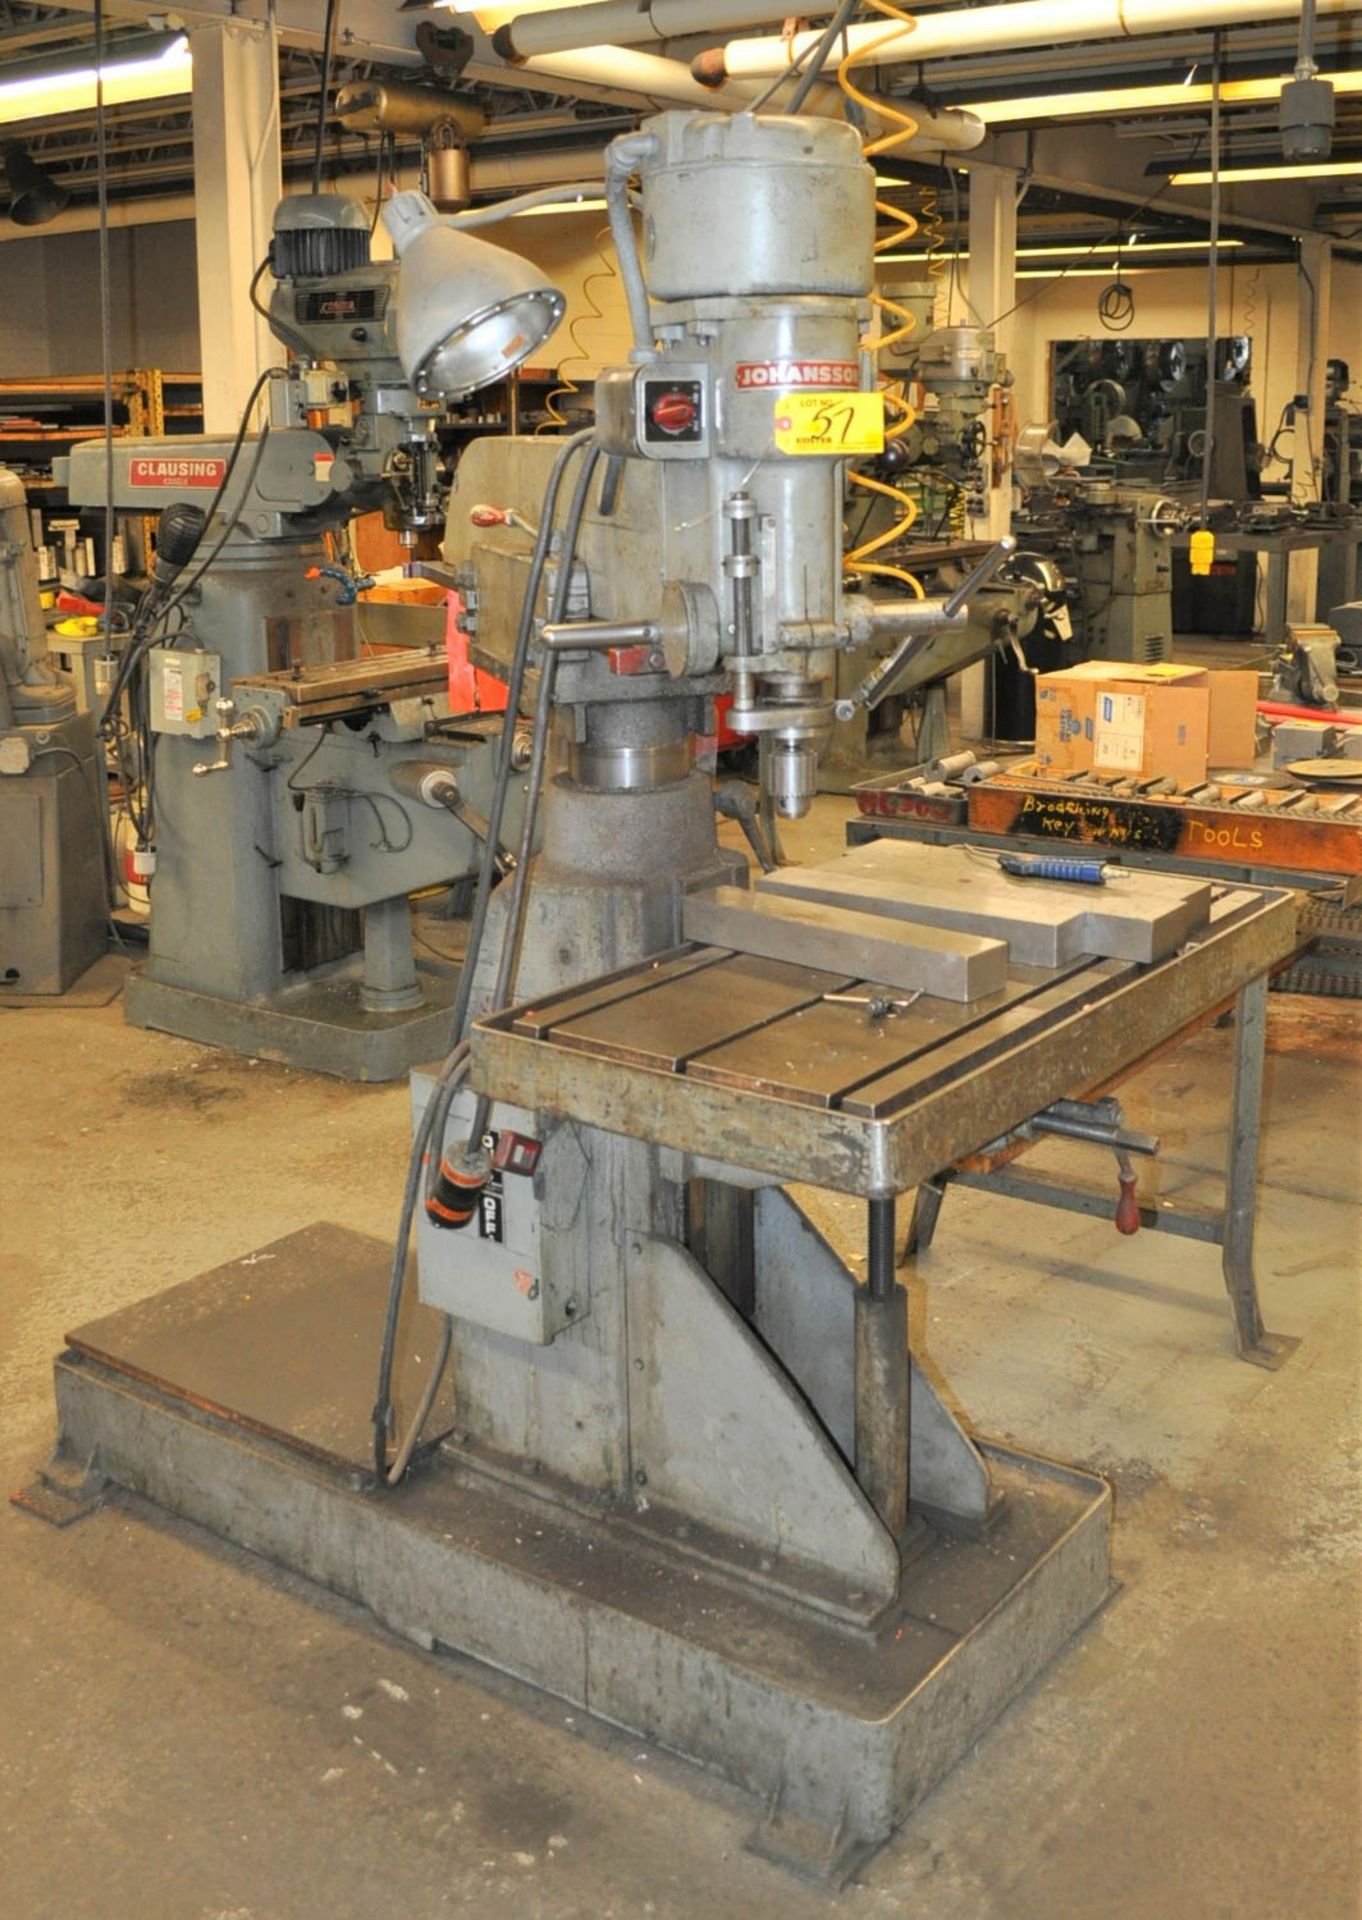 30" JOHANSSON RADIAL ARM DRILL, 37" X 17-3/4" T-SLOTTED TABLE, 8-SPINDLE SPEEDS, 125-1540 RPM, S/